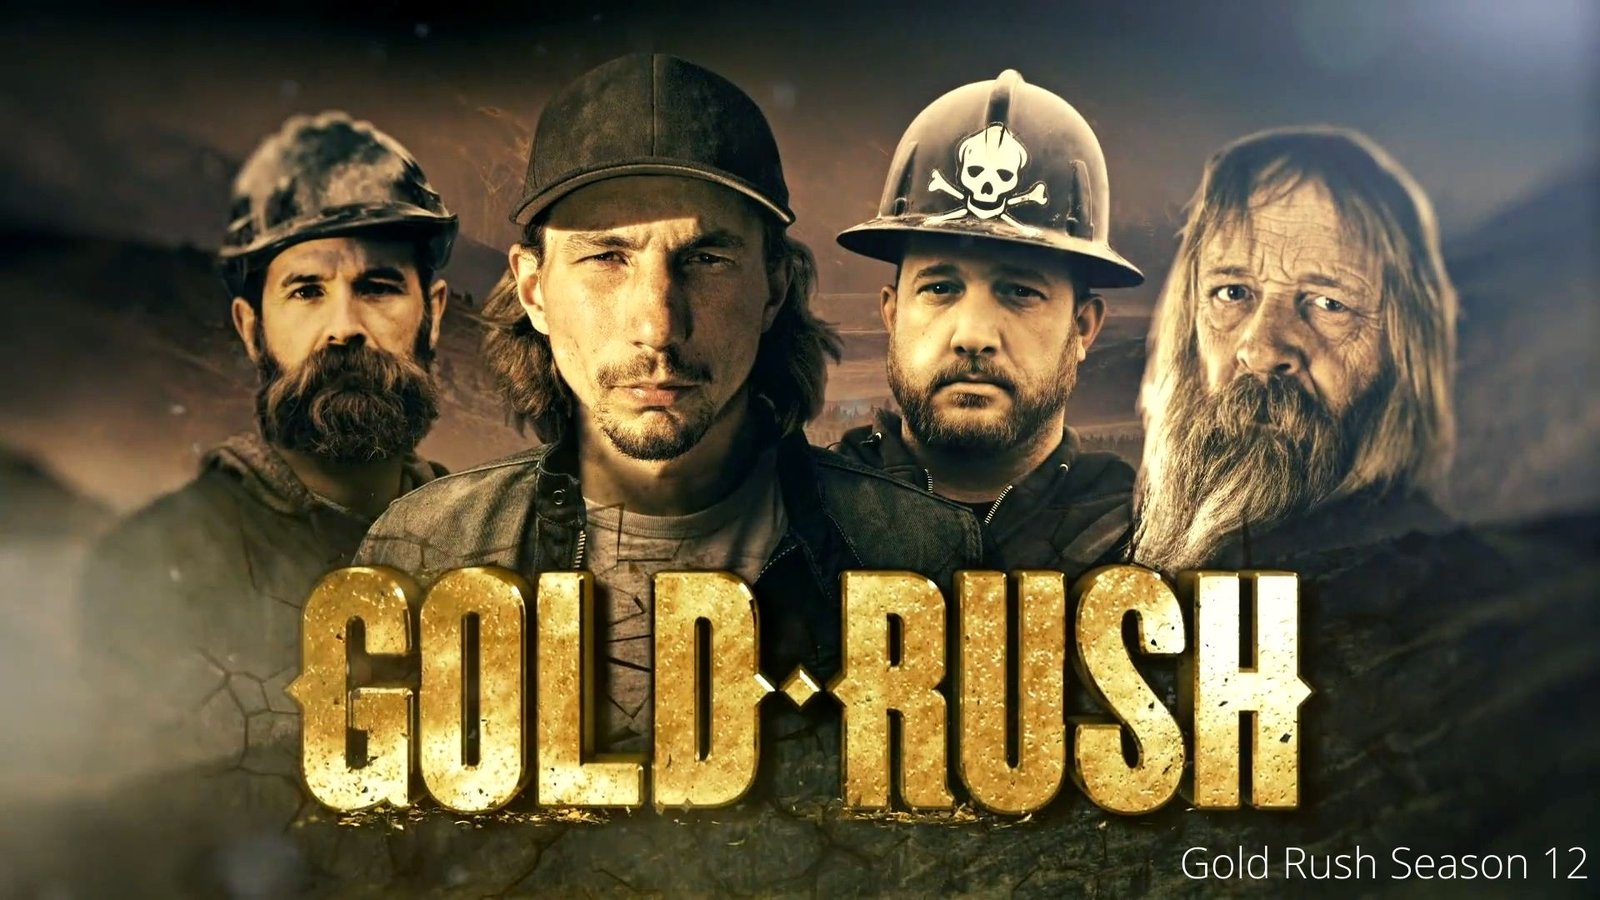 show me a trailer of the gold rush series